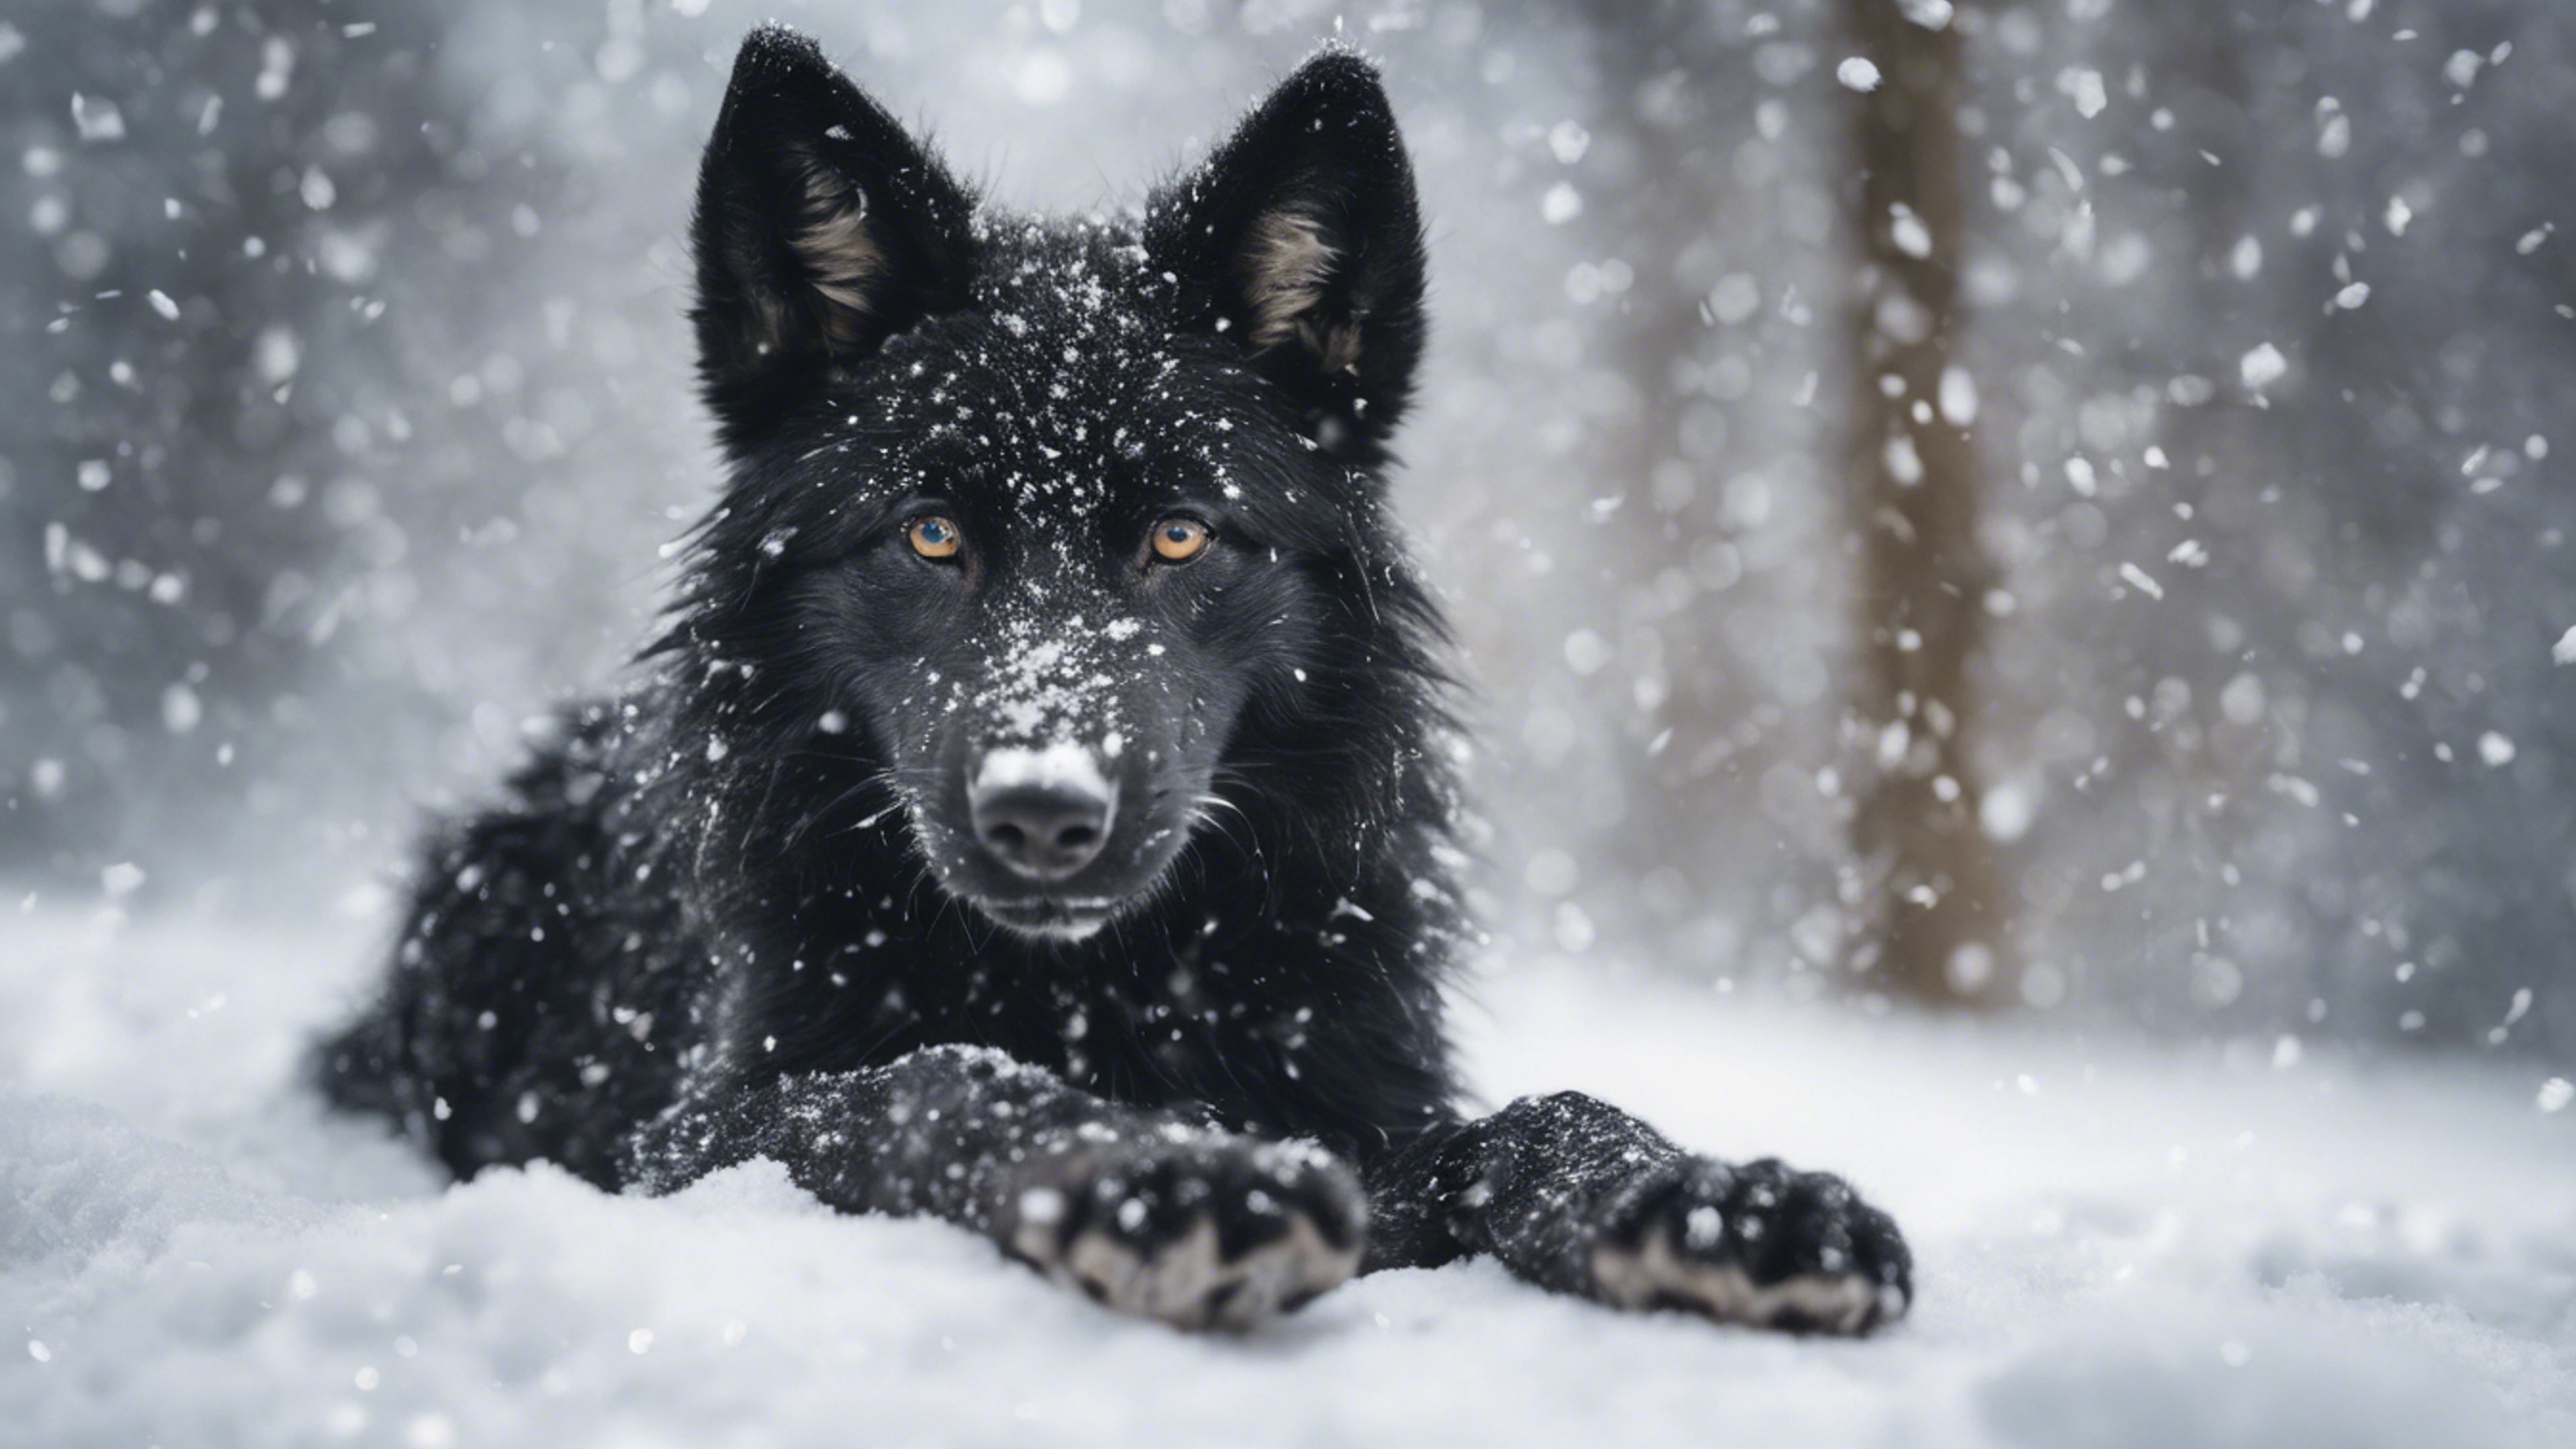 A playful black wolf puppy making the first snow angel of its life. Wallpaper[6a2907d16c81420c9dae]